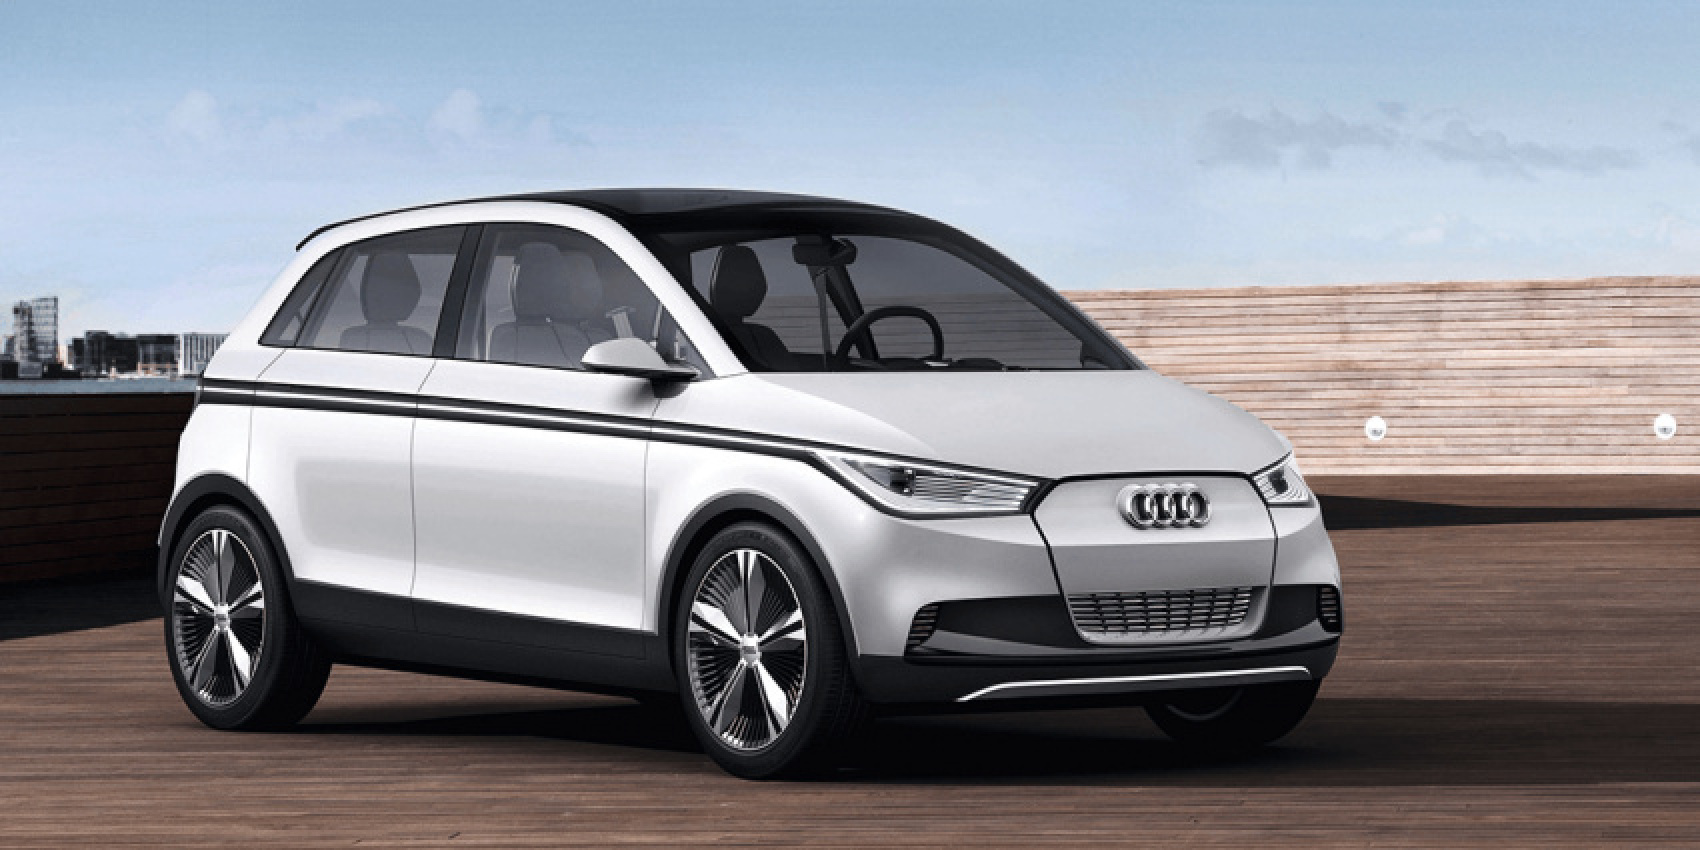 audi, automobile, autos, cars, electric vehicle, e-tron, i.d., id.2, volkswagen, audi is also planning small electric cars